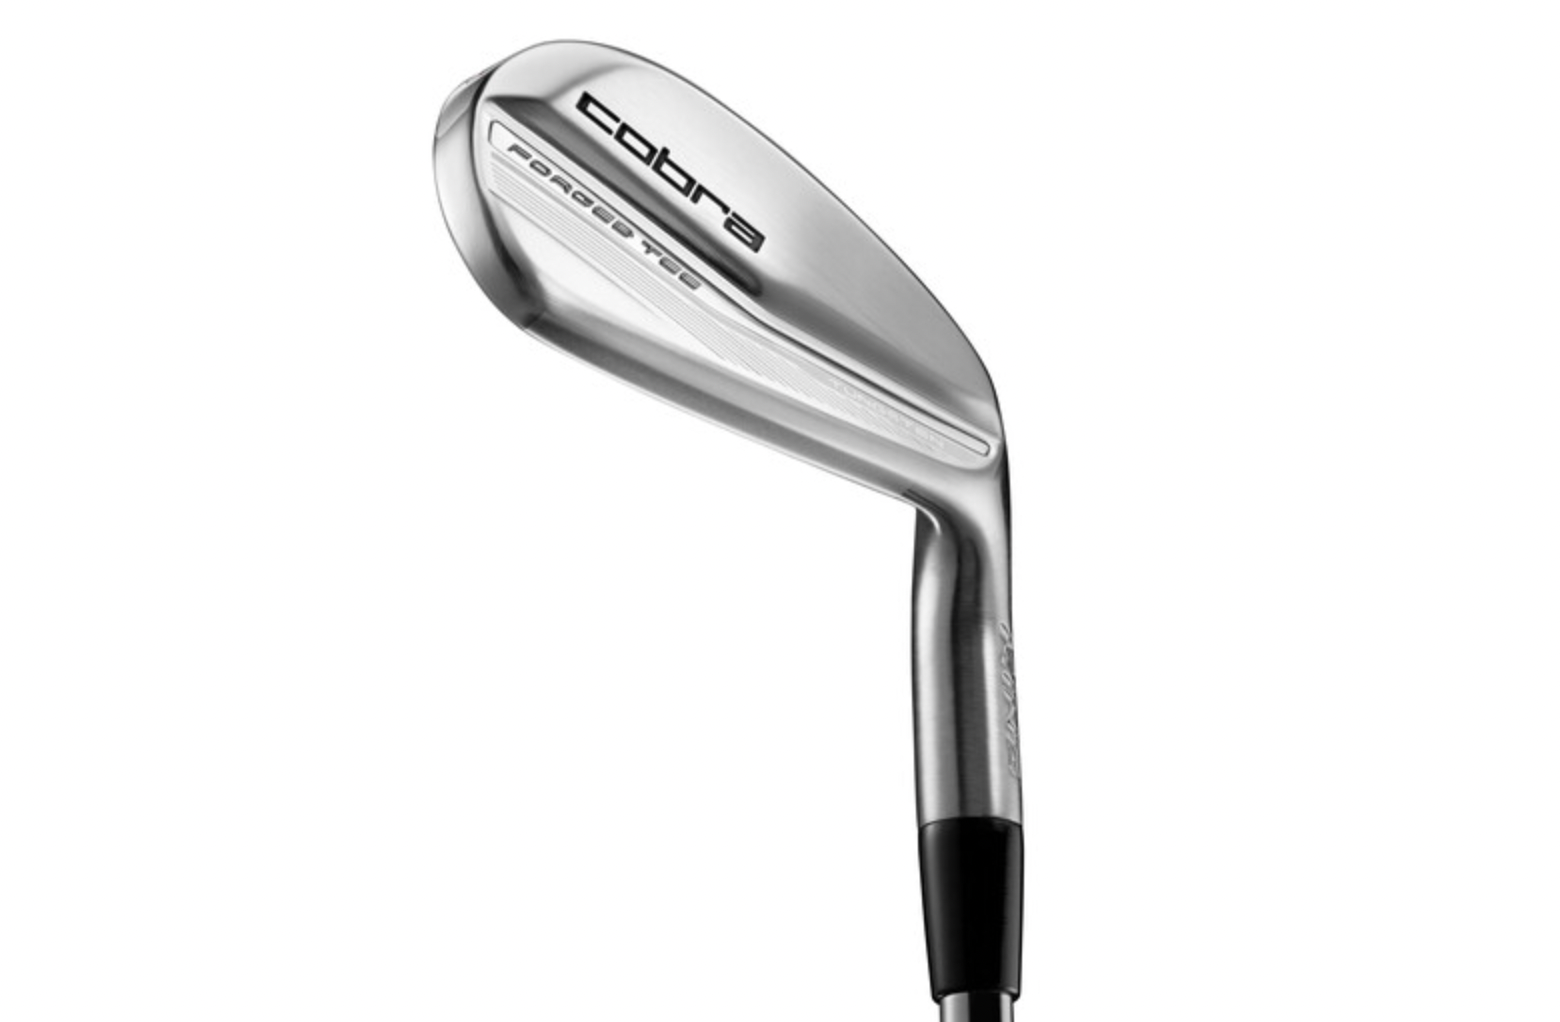 Cobra unveils fourth-generation King Forged Tec and Tec X irons